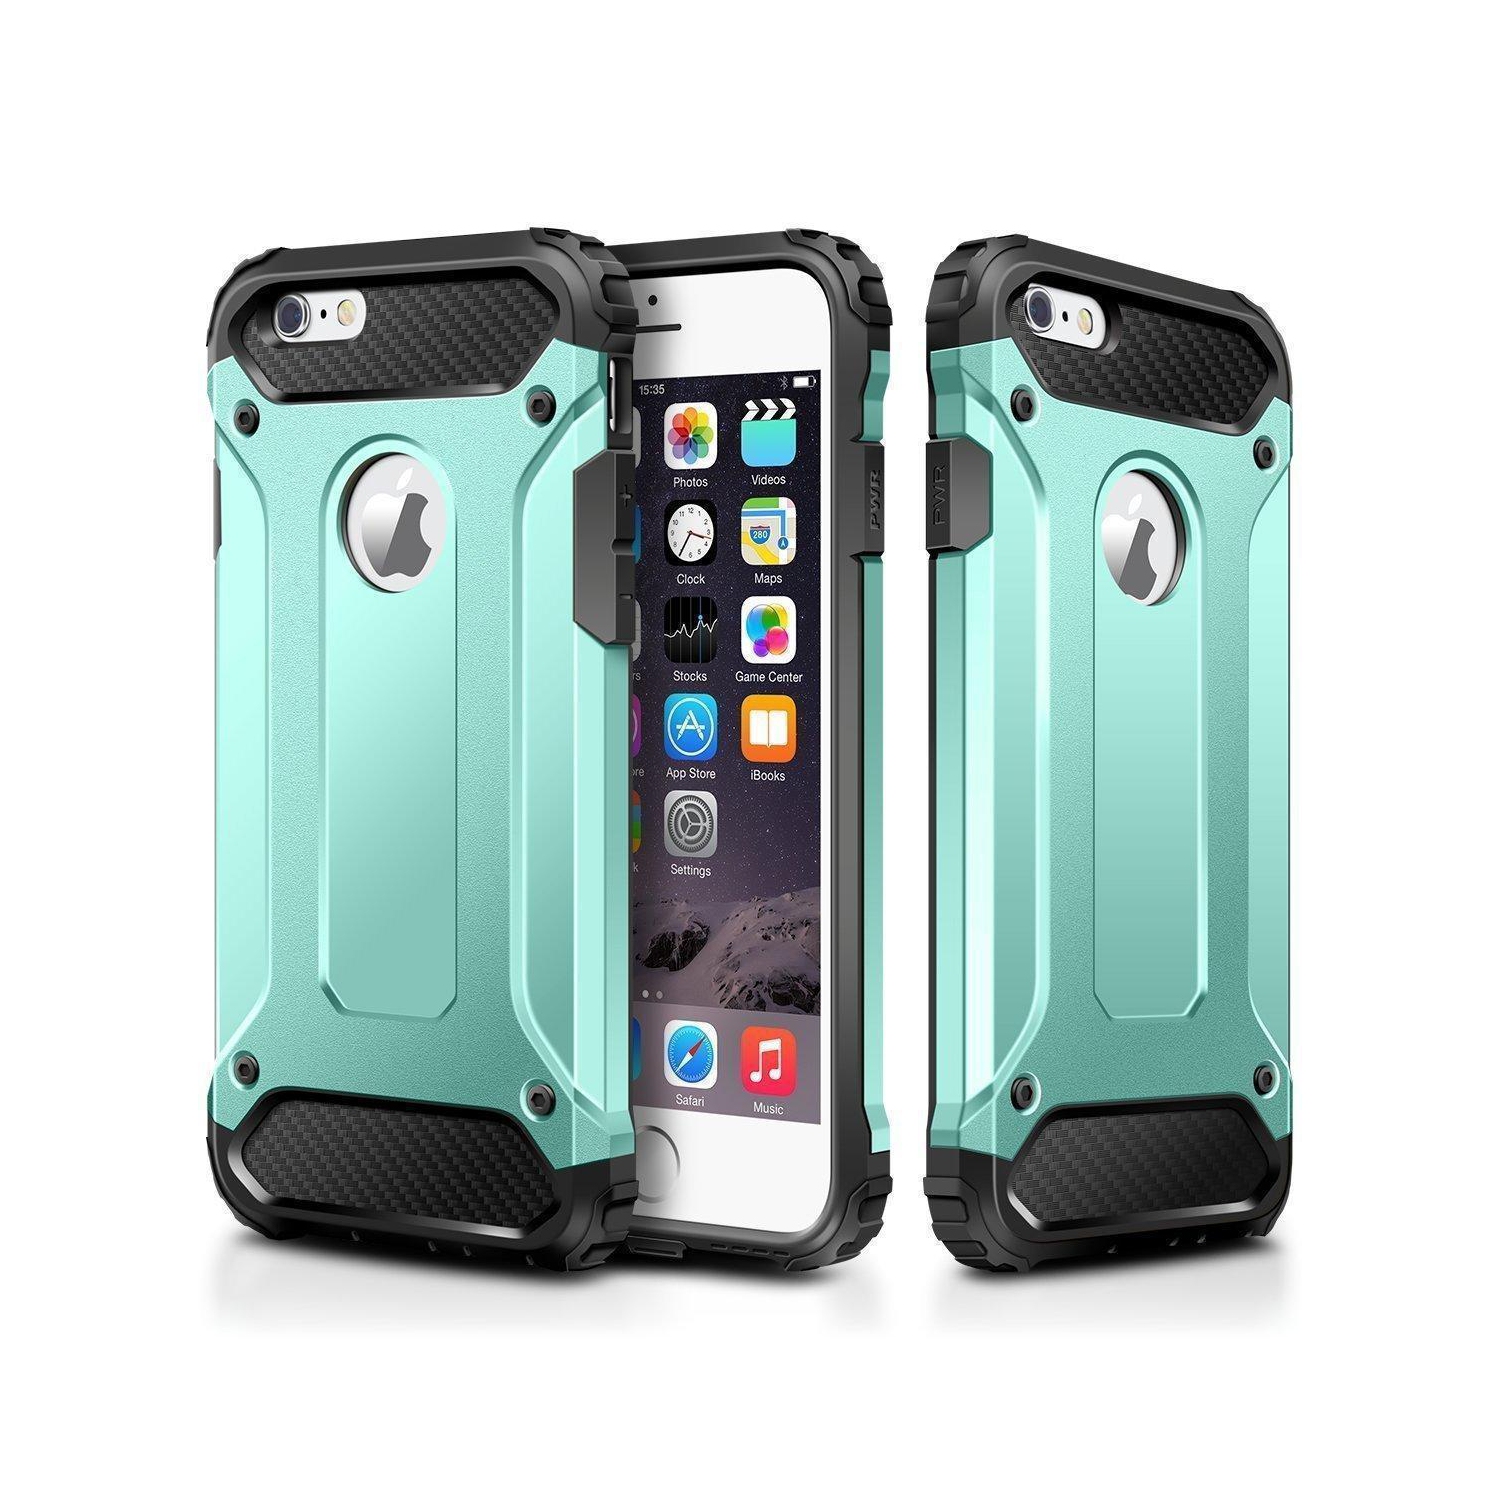 Hybrid Armor Shockproof Rugged Bumper Case For Apple iPhone 6 Plus / 6s Plus (Mint Green)